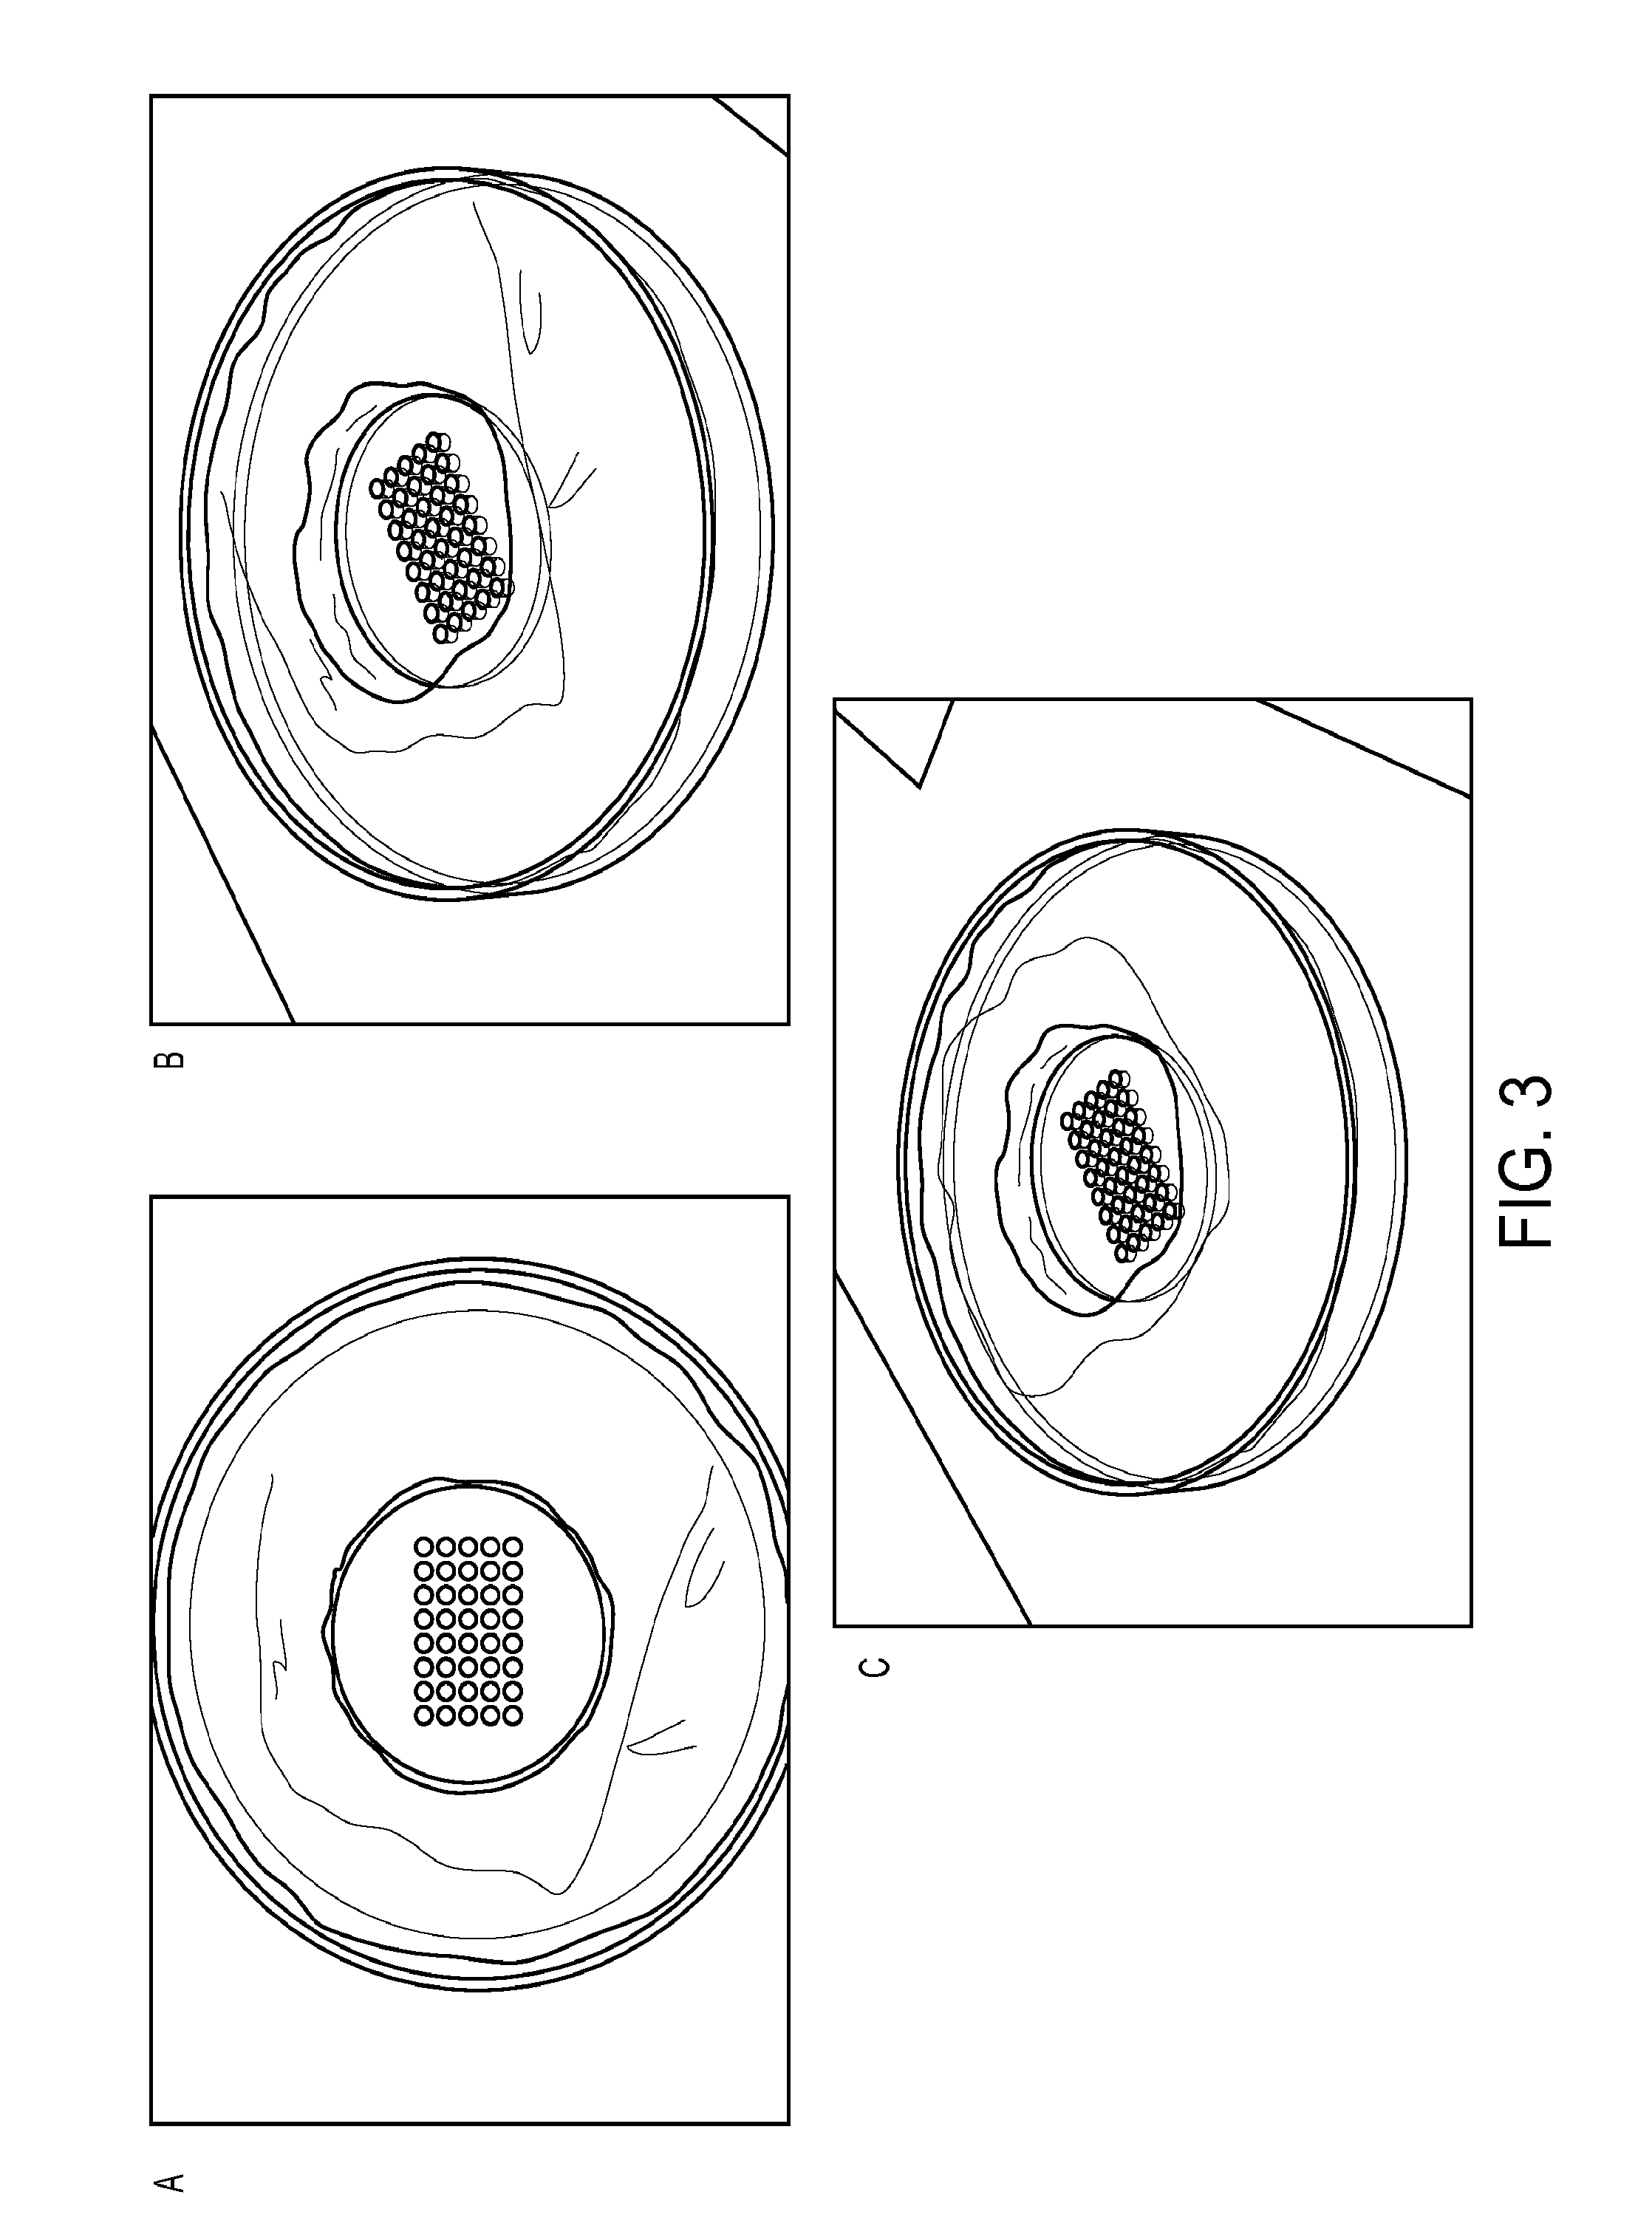 Tissue array for cell spheroids and methods of use